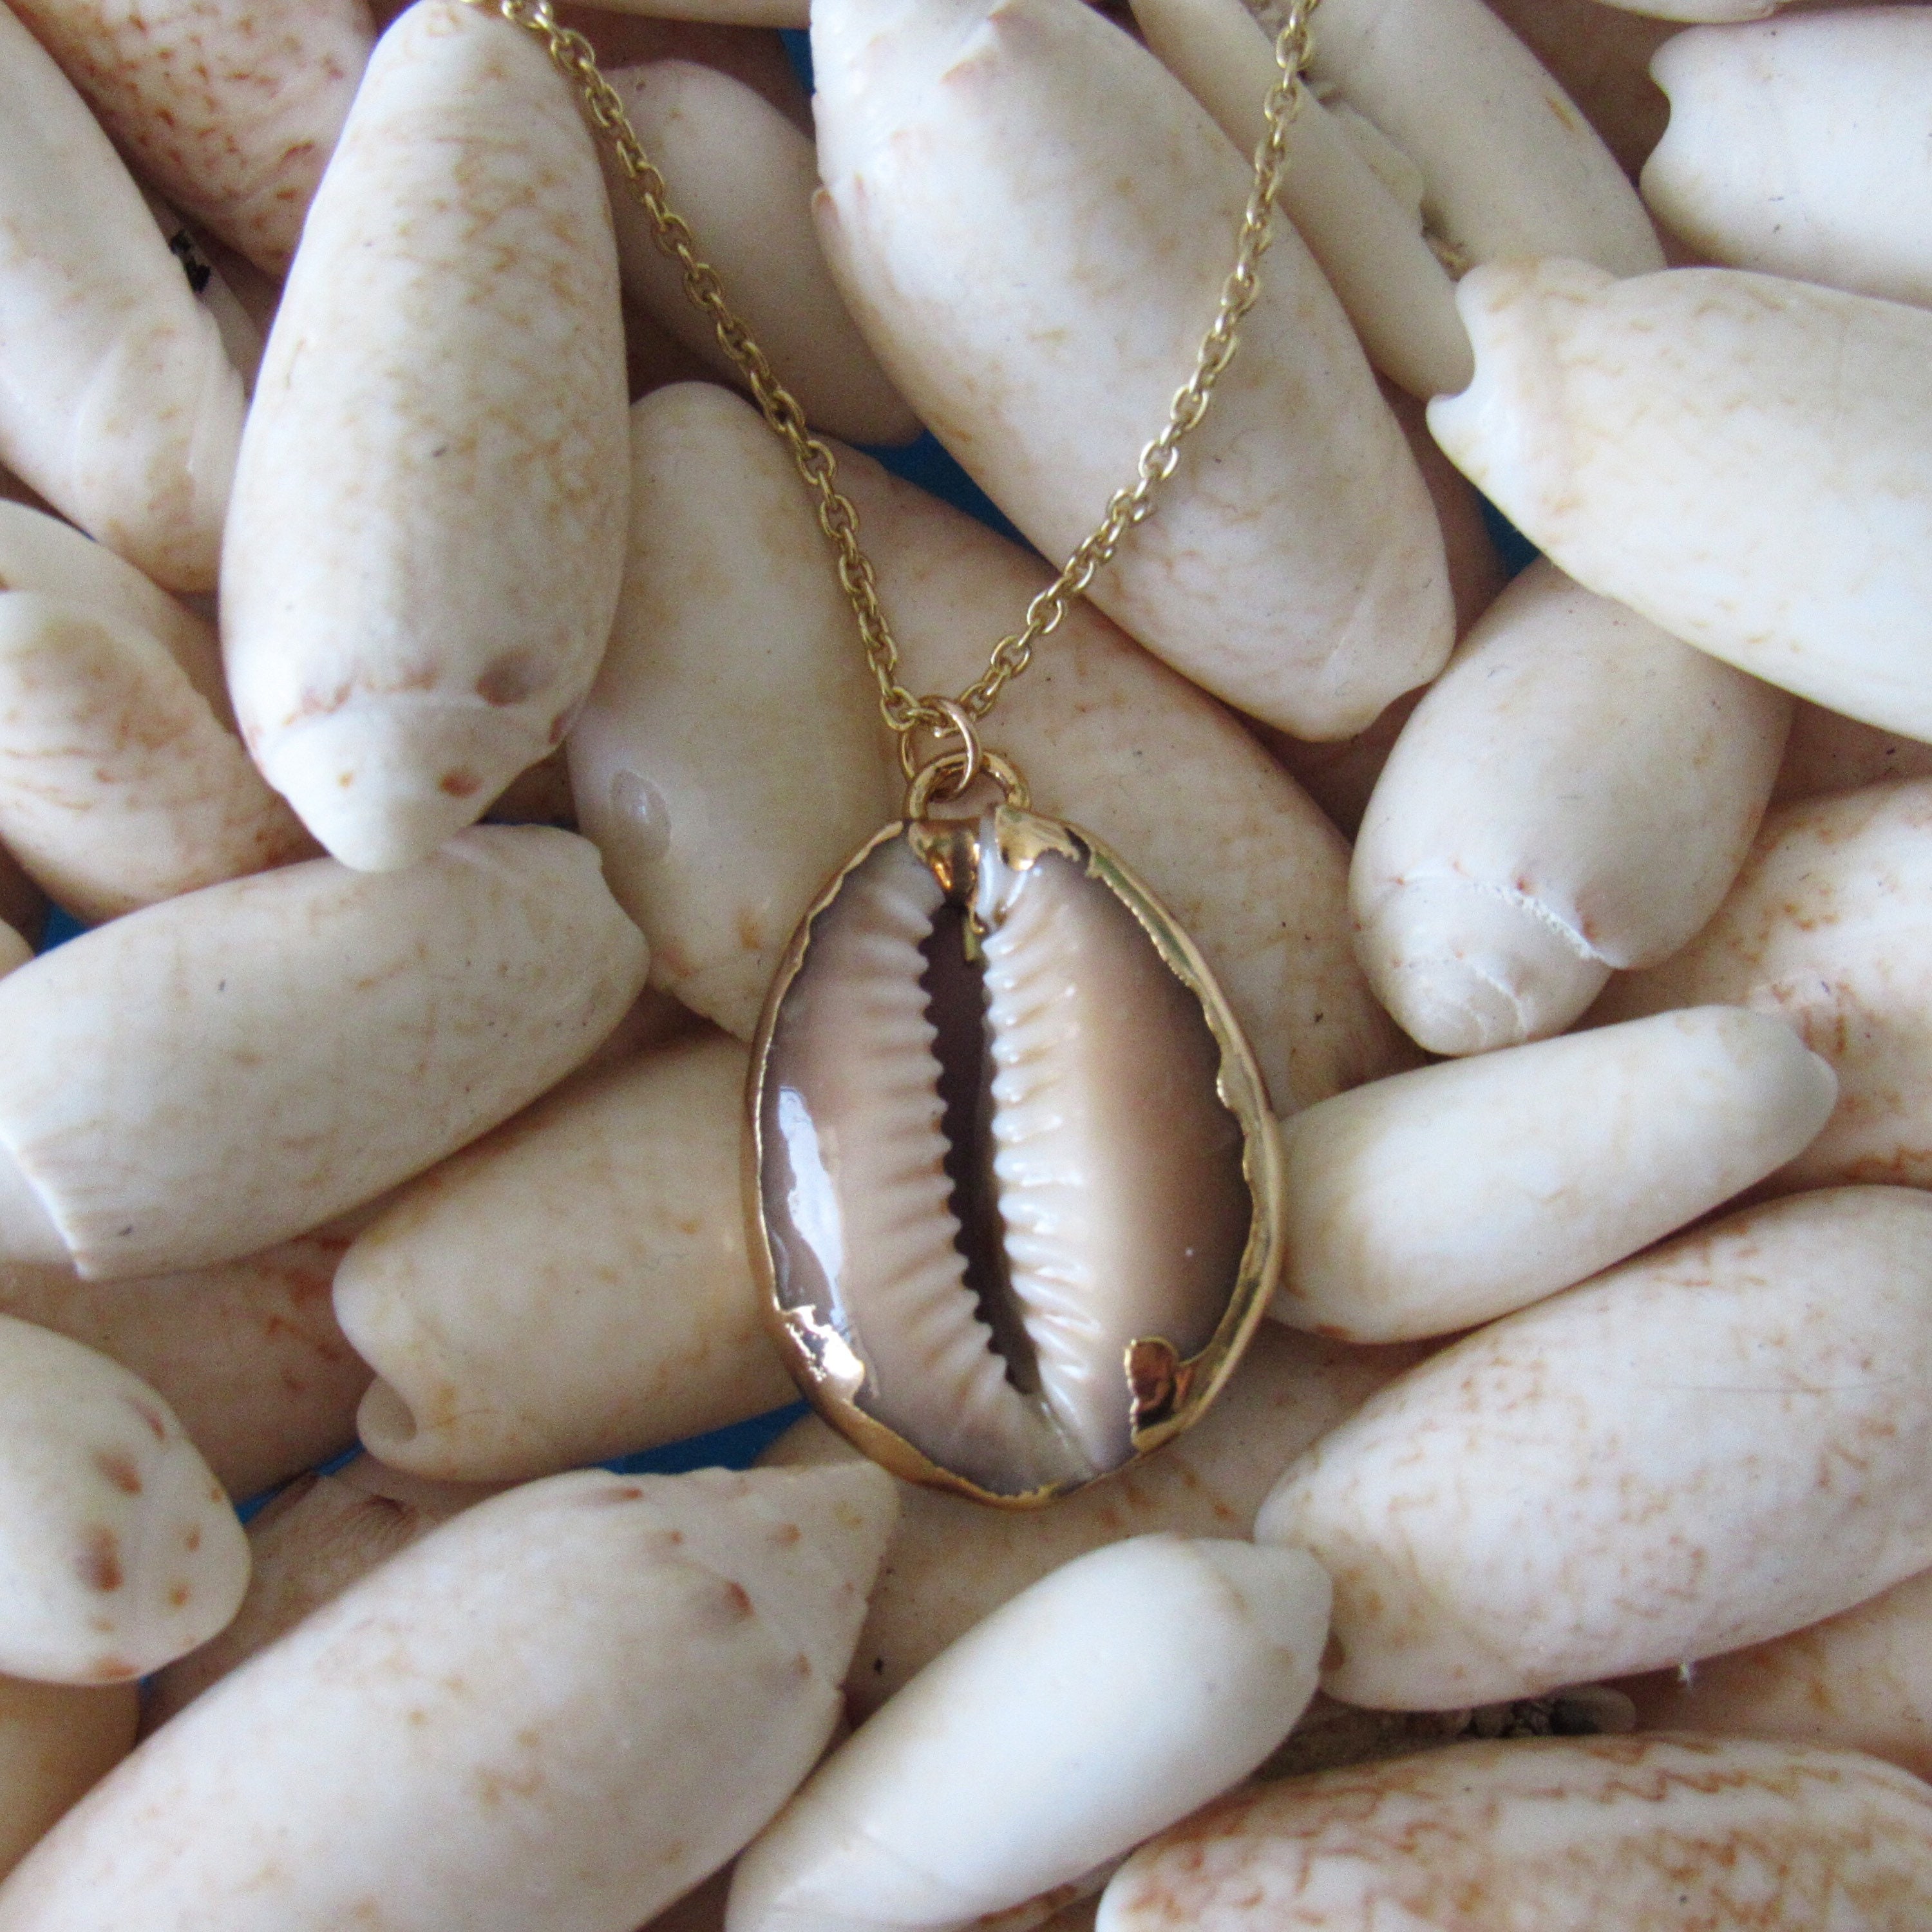 Gold Dipped Cowry Shell Necklace | Ocean | Sea | Jewelry With Meaning ...